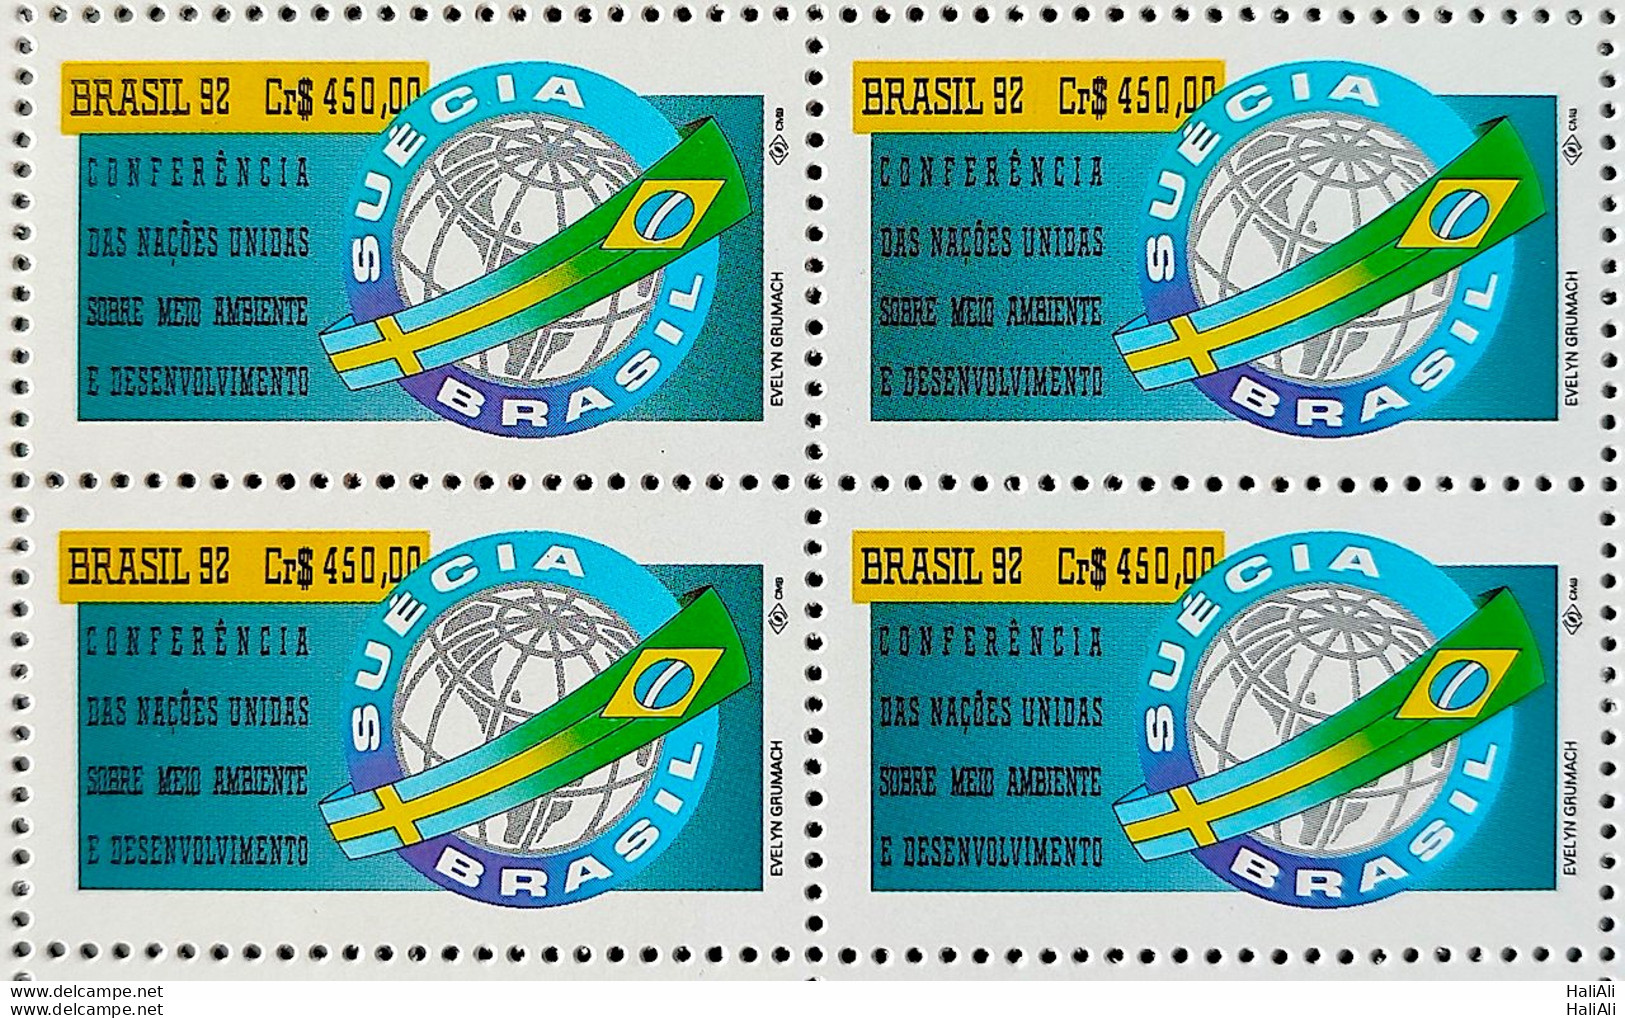 C 1798 Brazil Stamp Conference Eco 92 Rio De Janeiro Sweden Flag Environment 1992 Block Of 4 - Unused Stamps